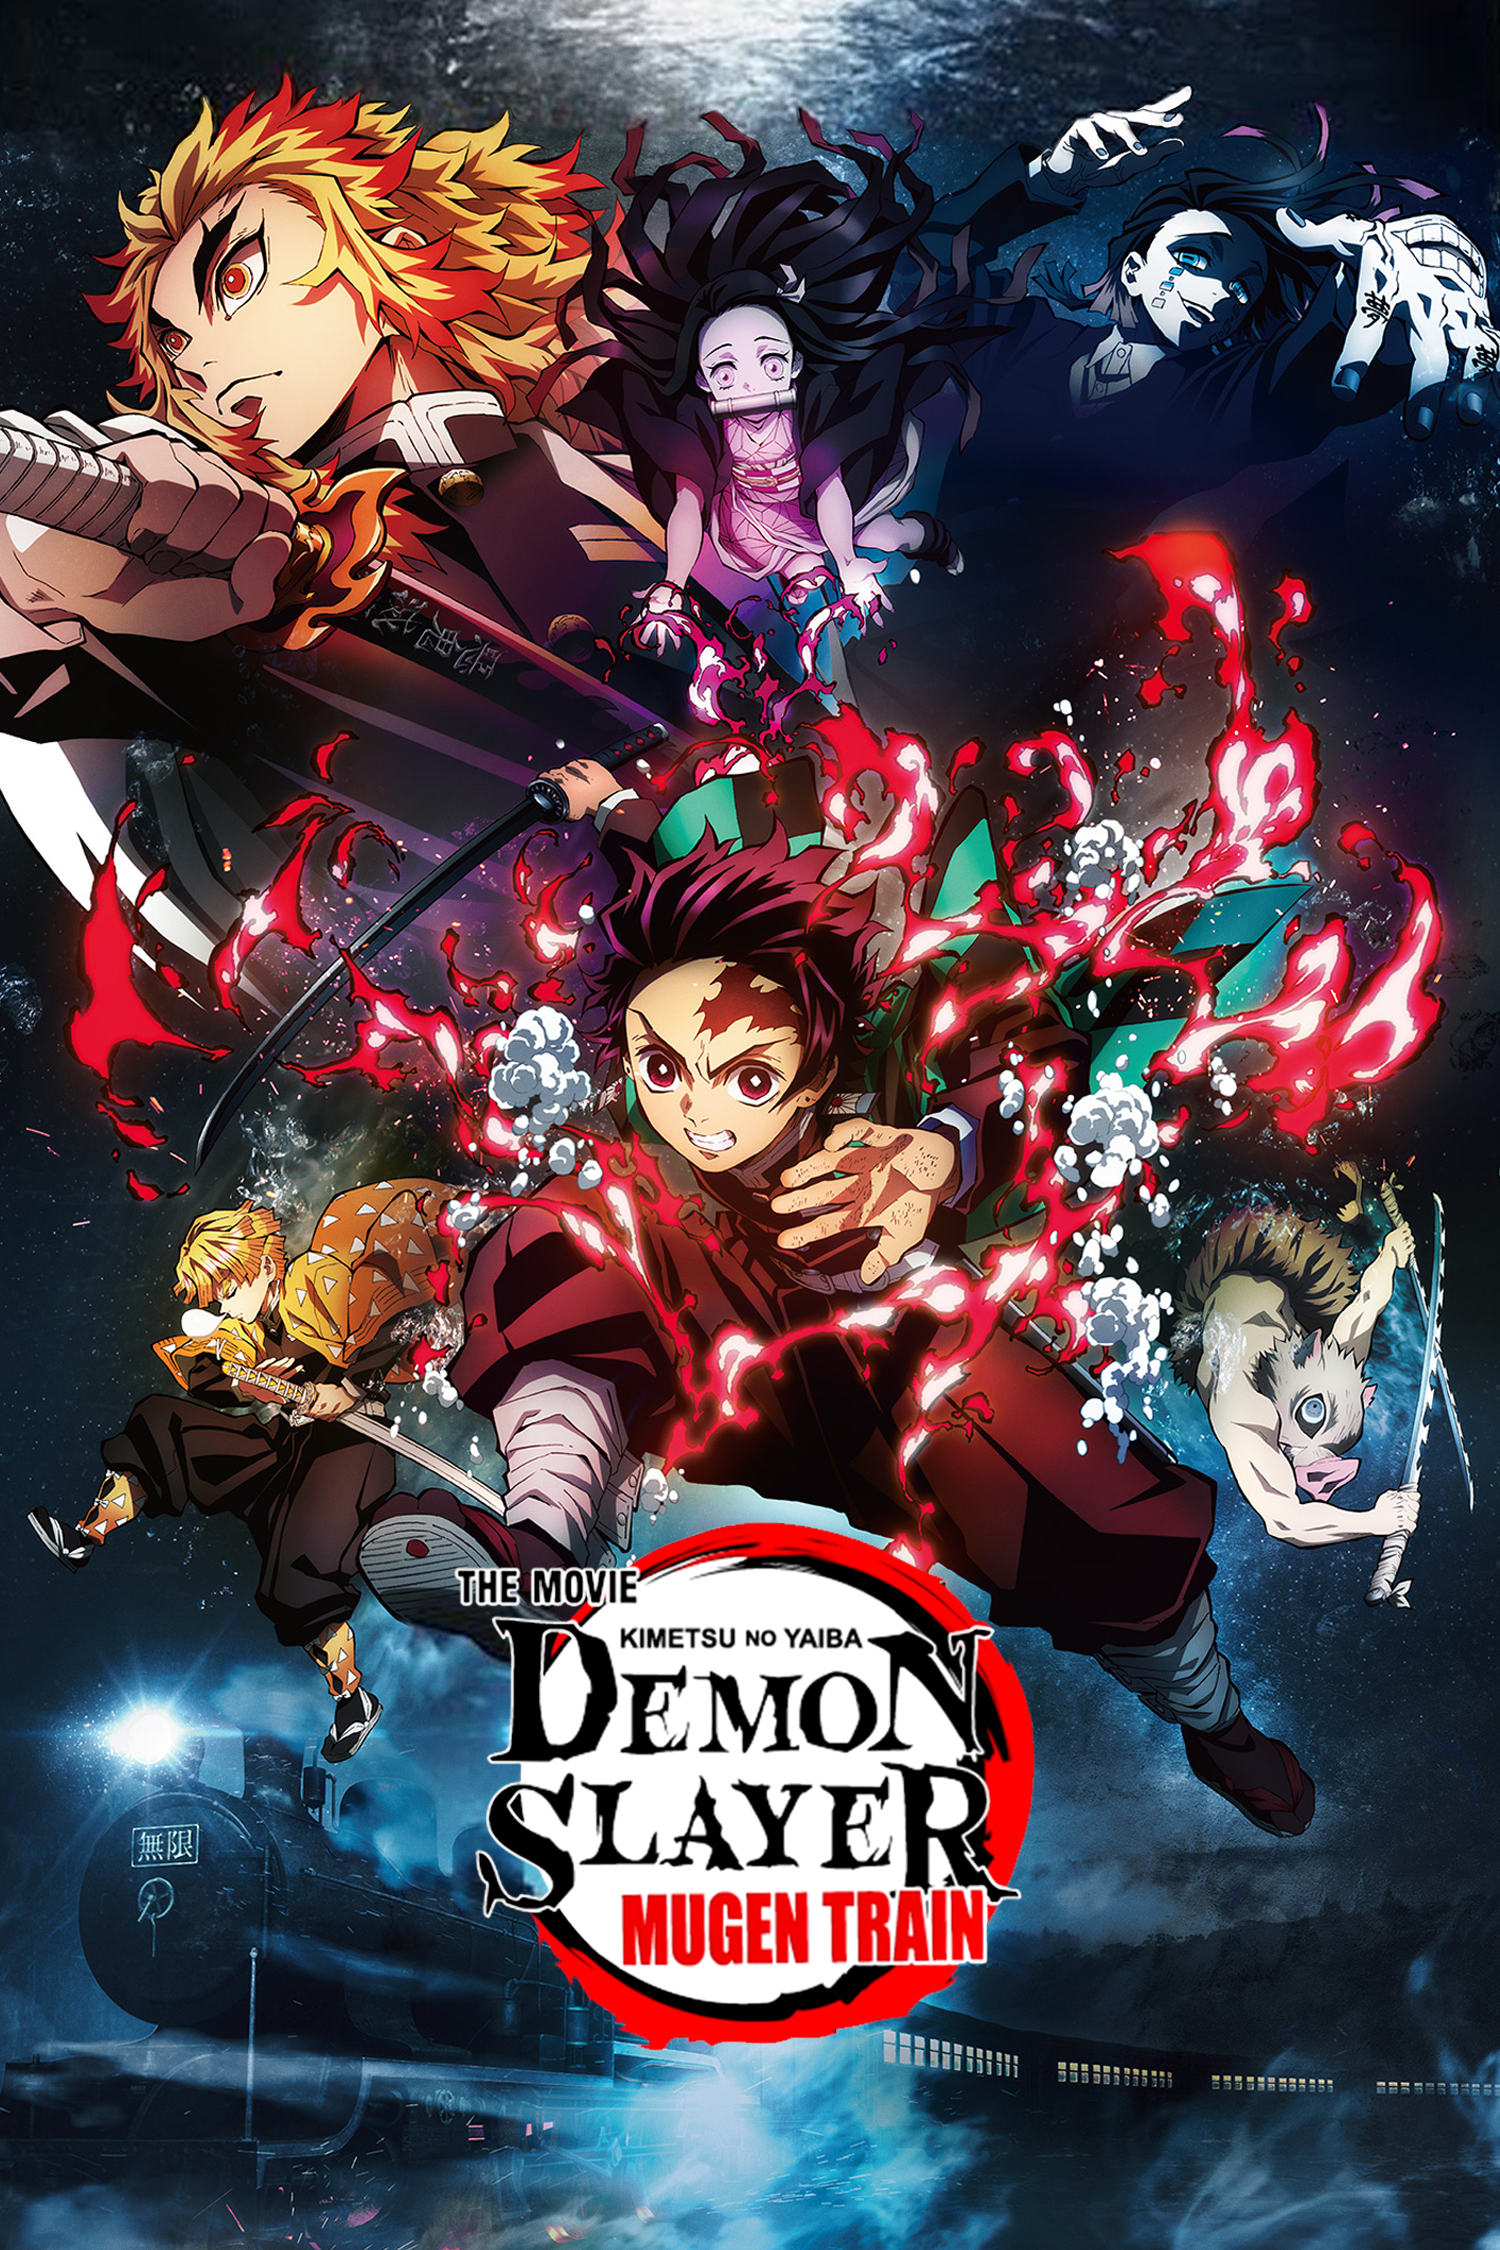 What will Demon Slayer Season 4 be about